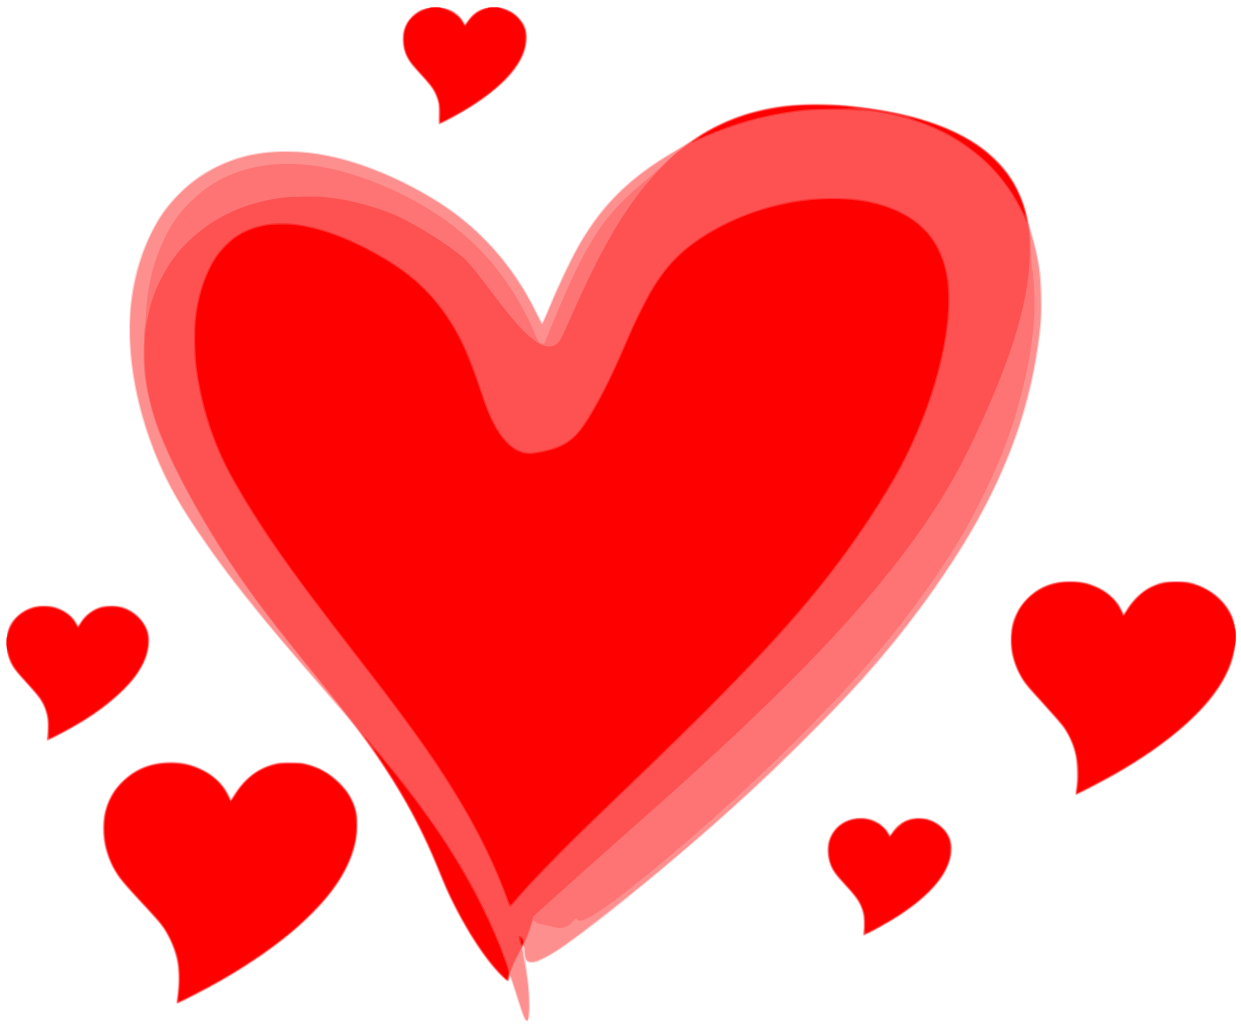 drawn love heart png transparent